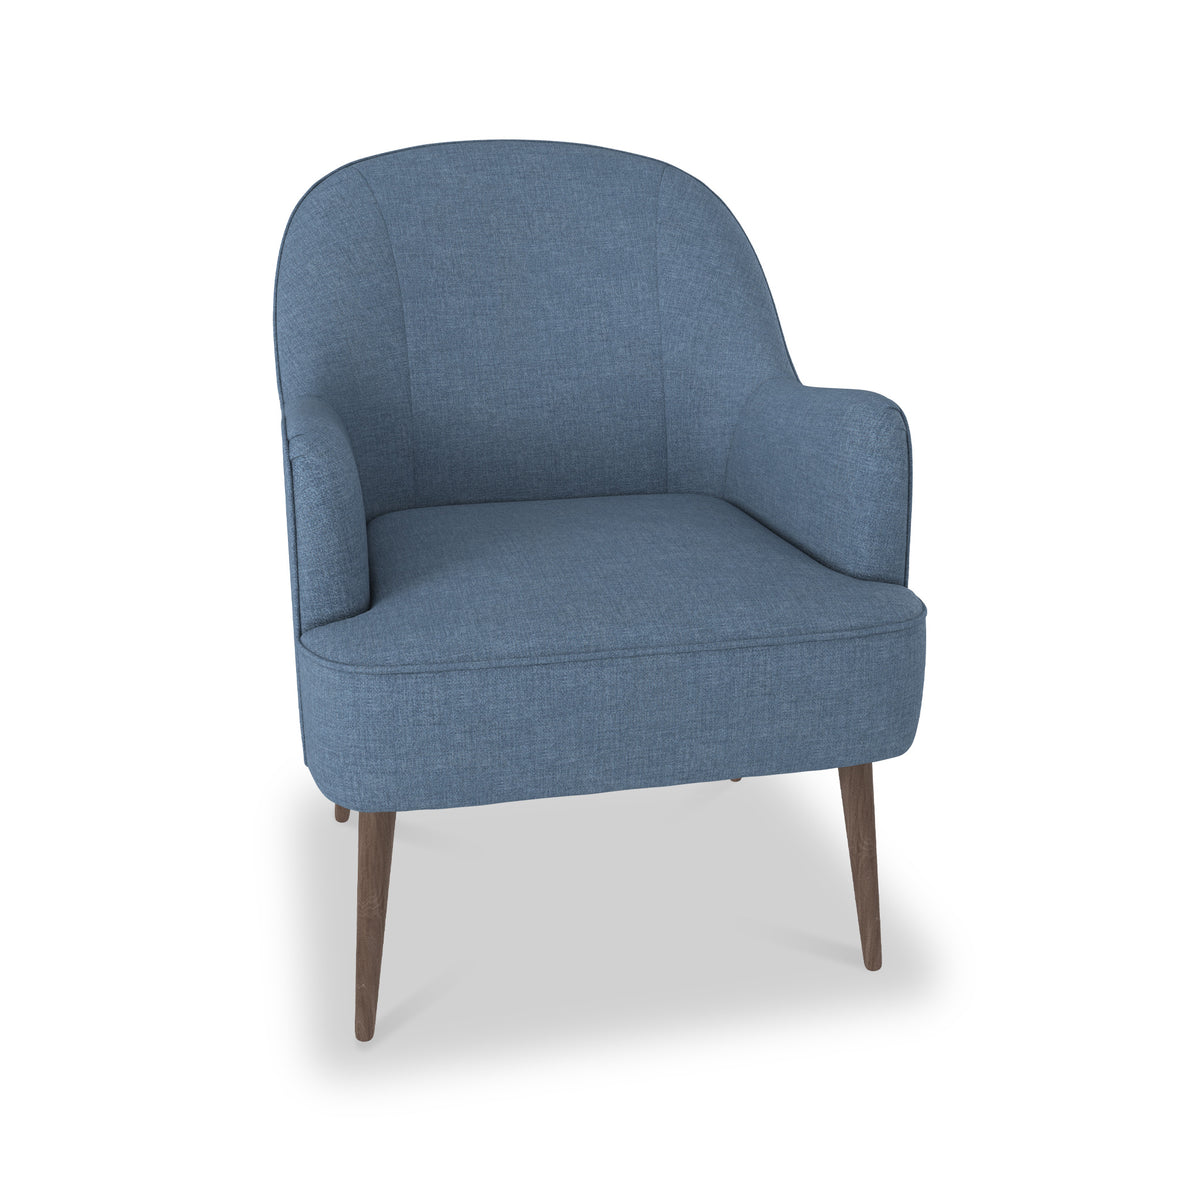 Todd Colbolt Blue Accent Chair for Living Room or Bedroom from Roseland Furniture